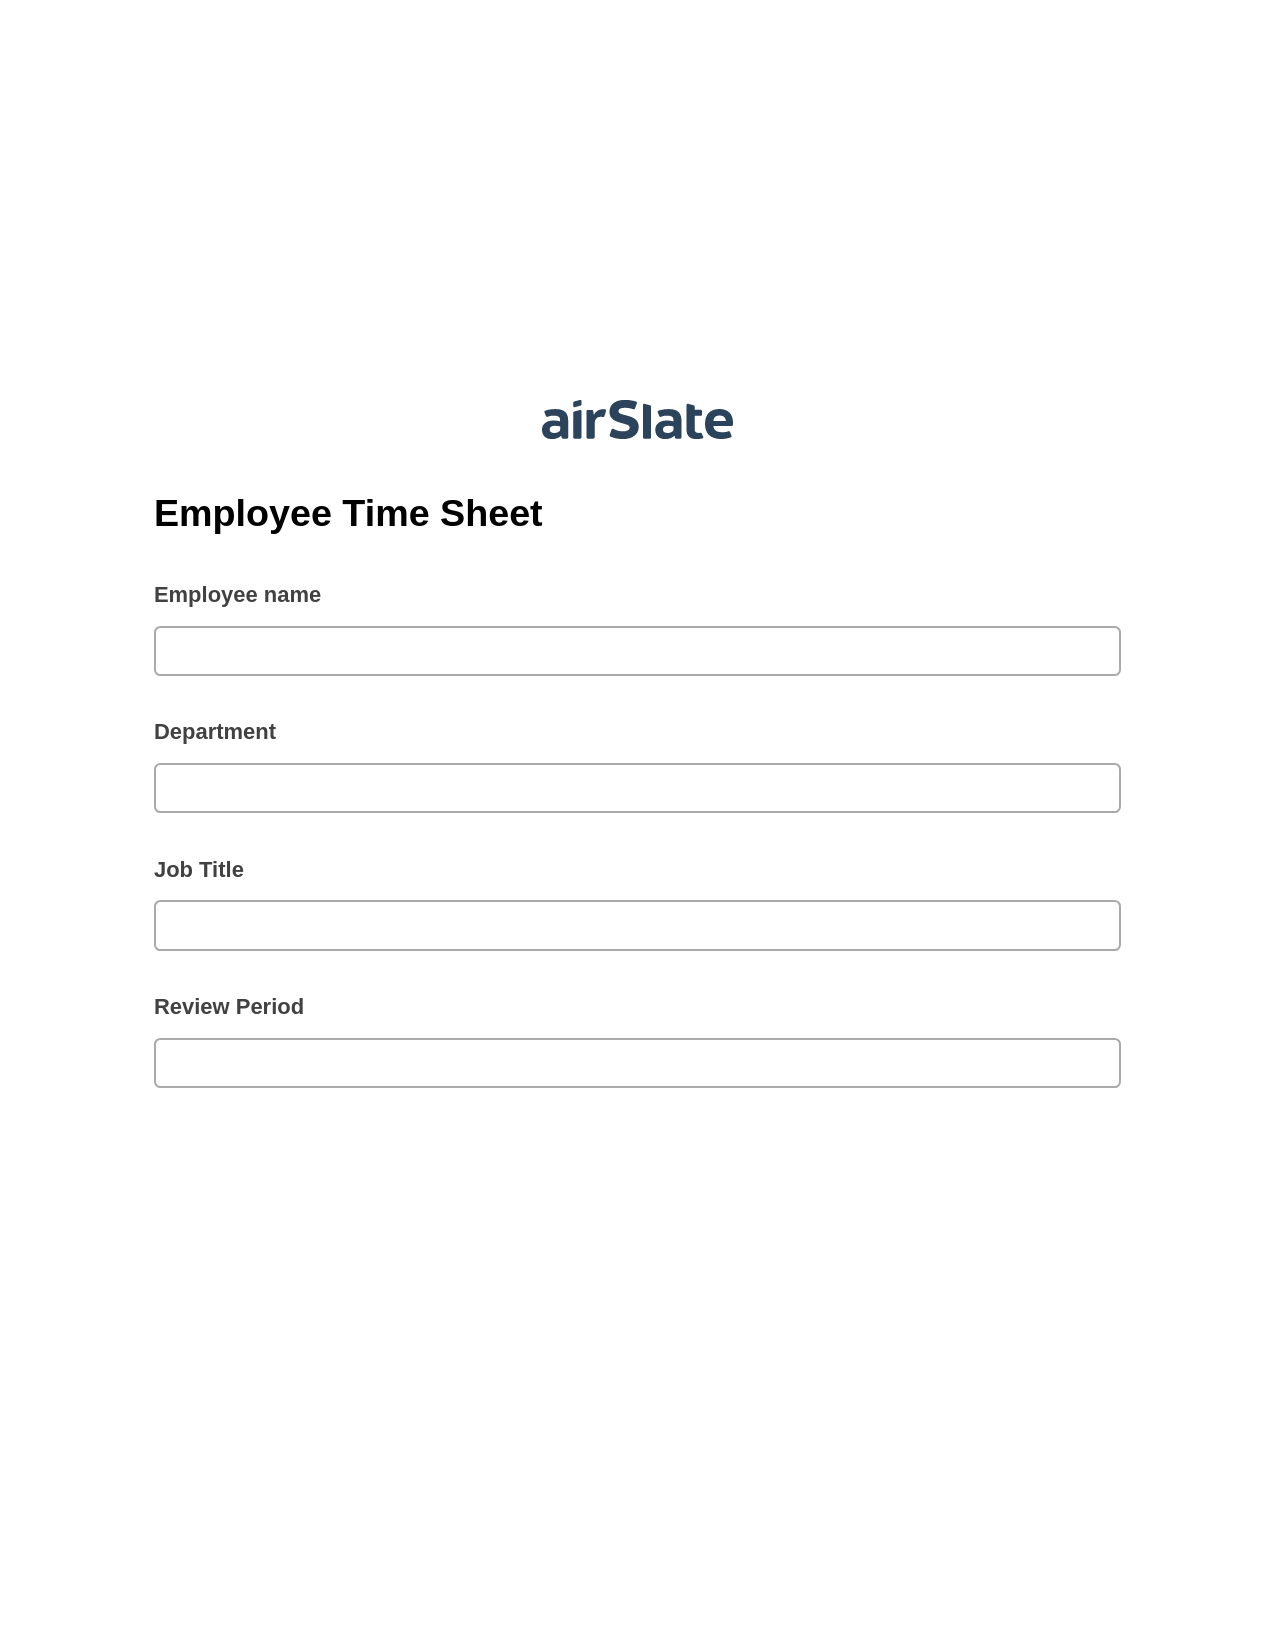 Employee Time Sheet Pre-fill from another Slate Bot, Invoke Salesforce Process Bot, Export to WebMerge Bot